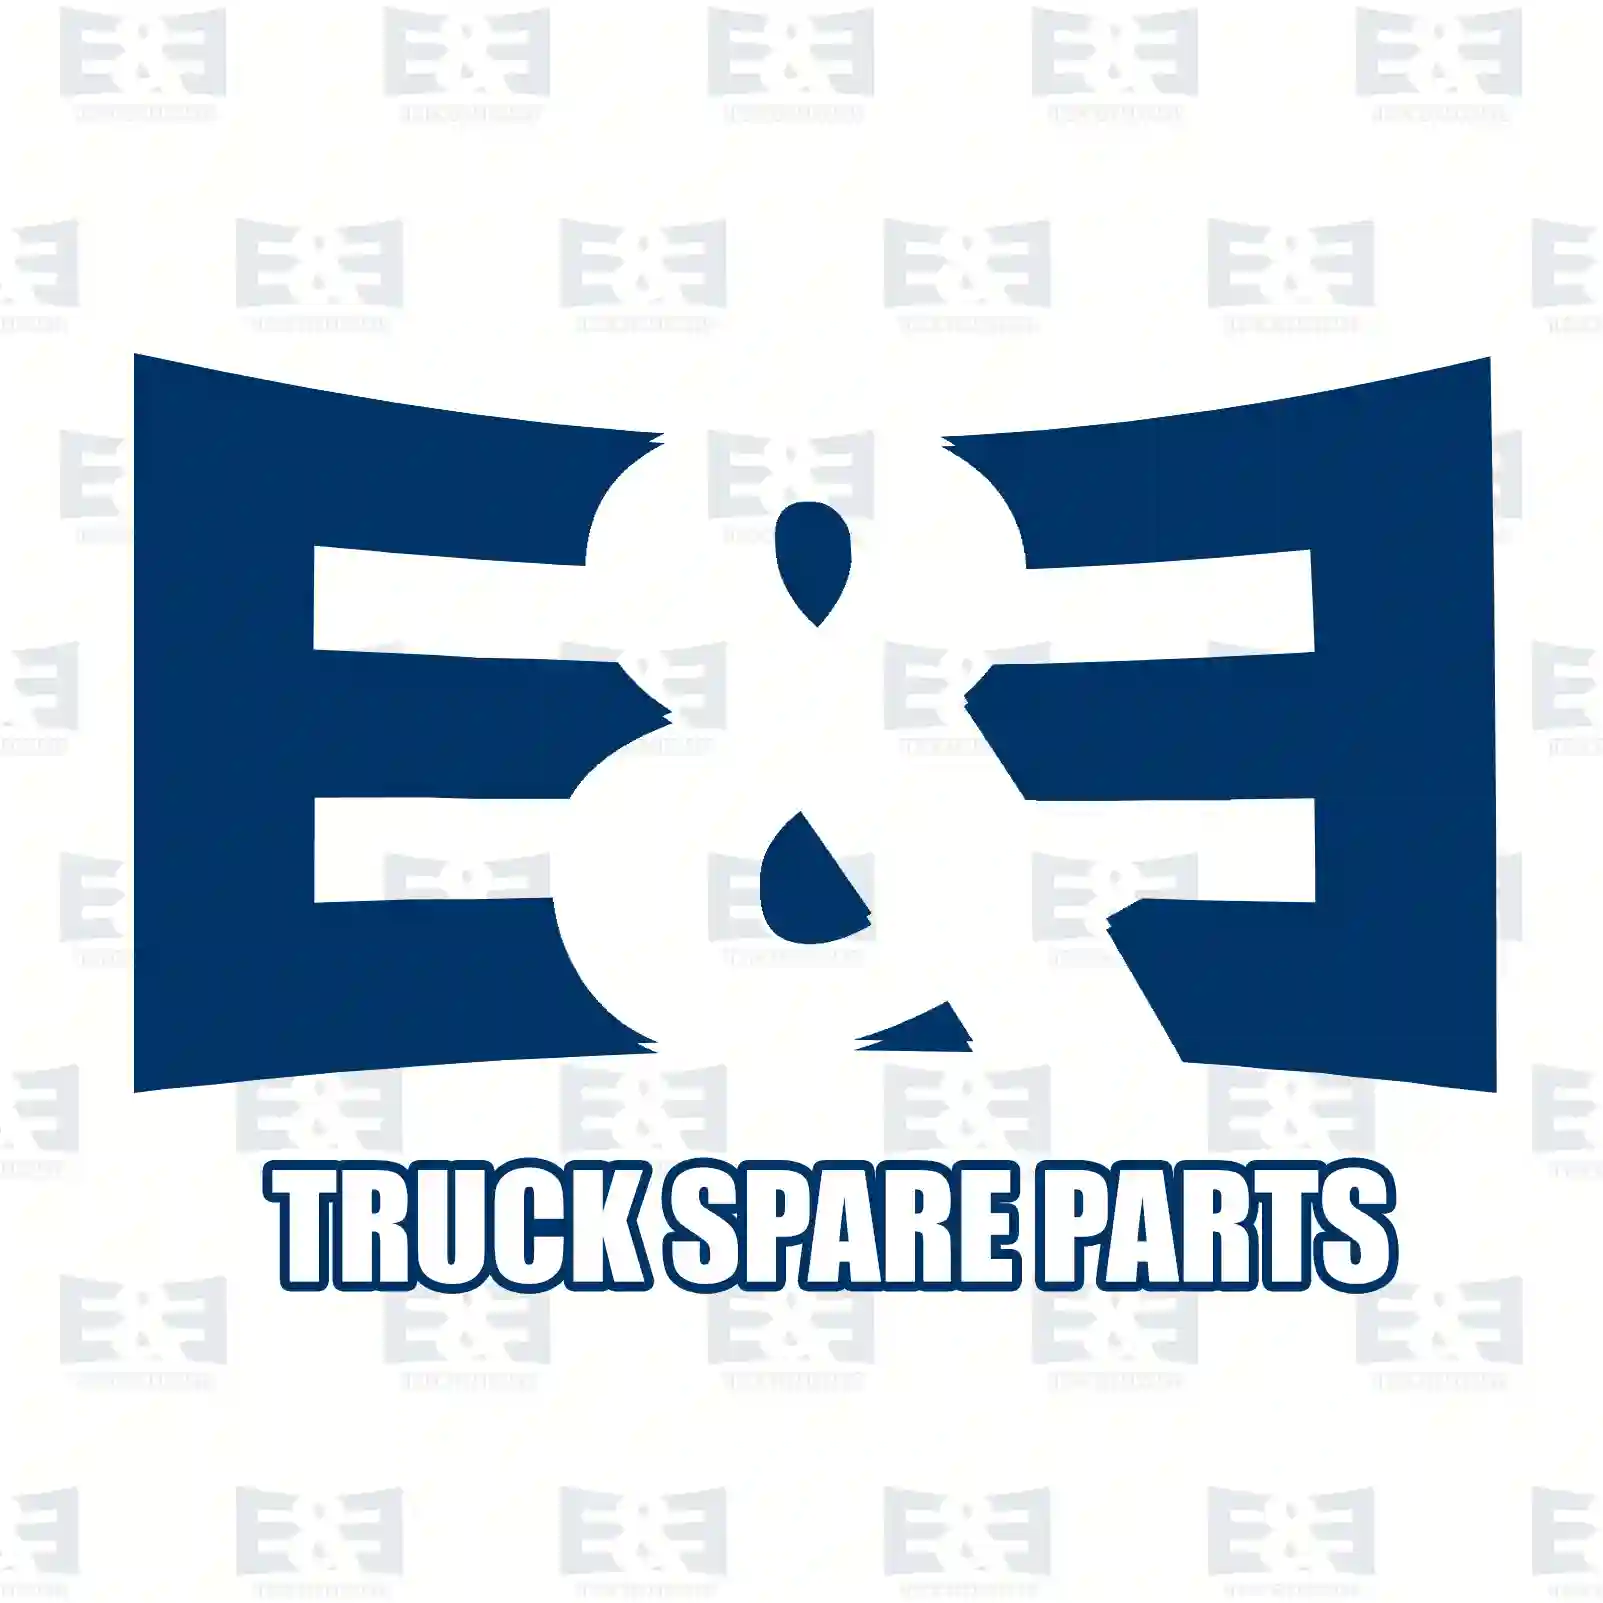  Disc brake pad kit, without wear indicator || E&E Truck Spare Parts | Truck Spare Parts, Auotomotive Spare Parts